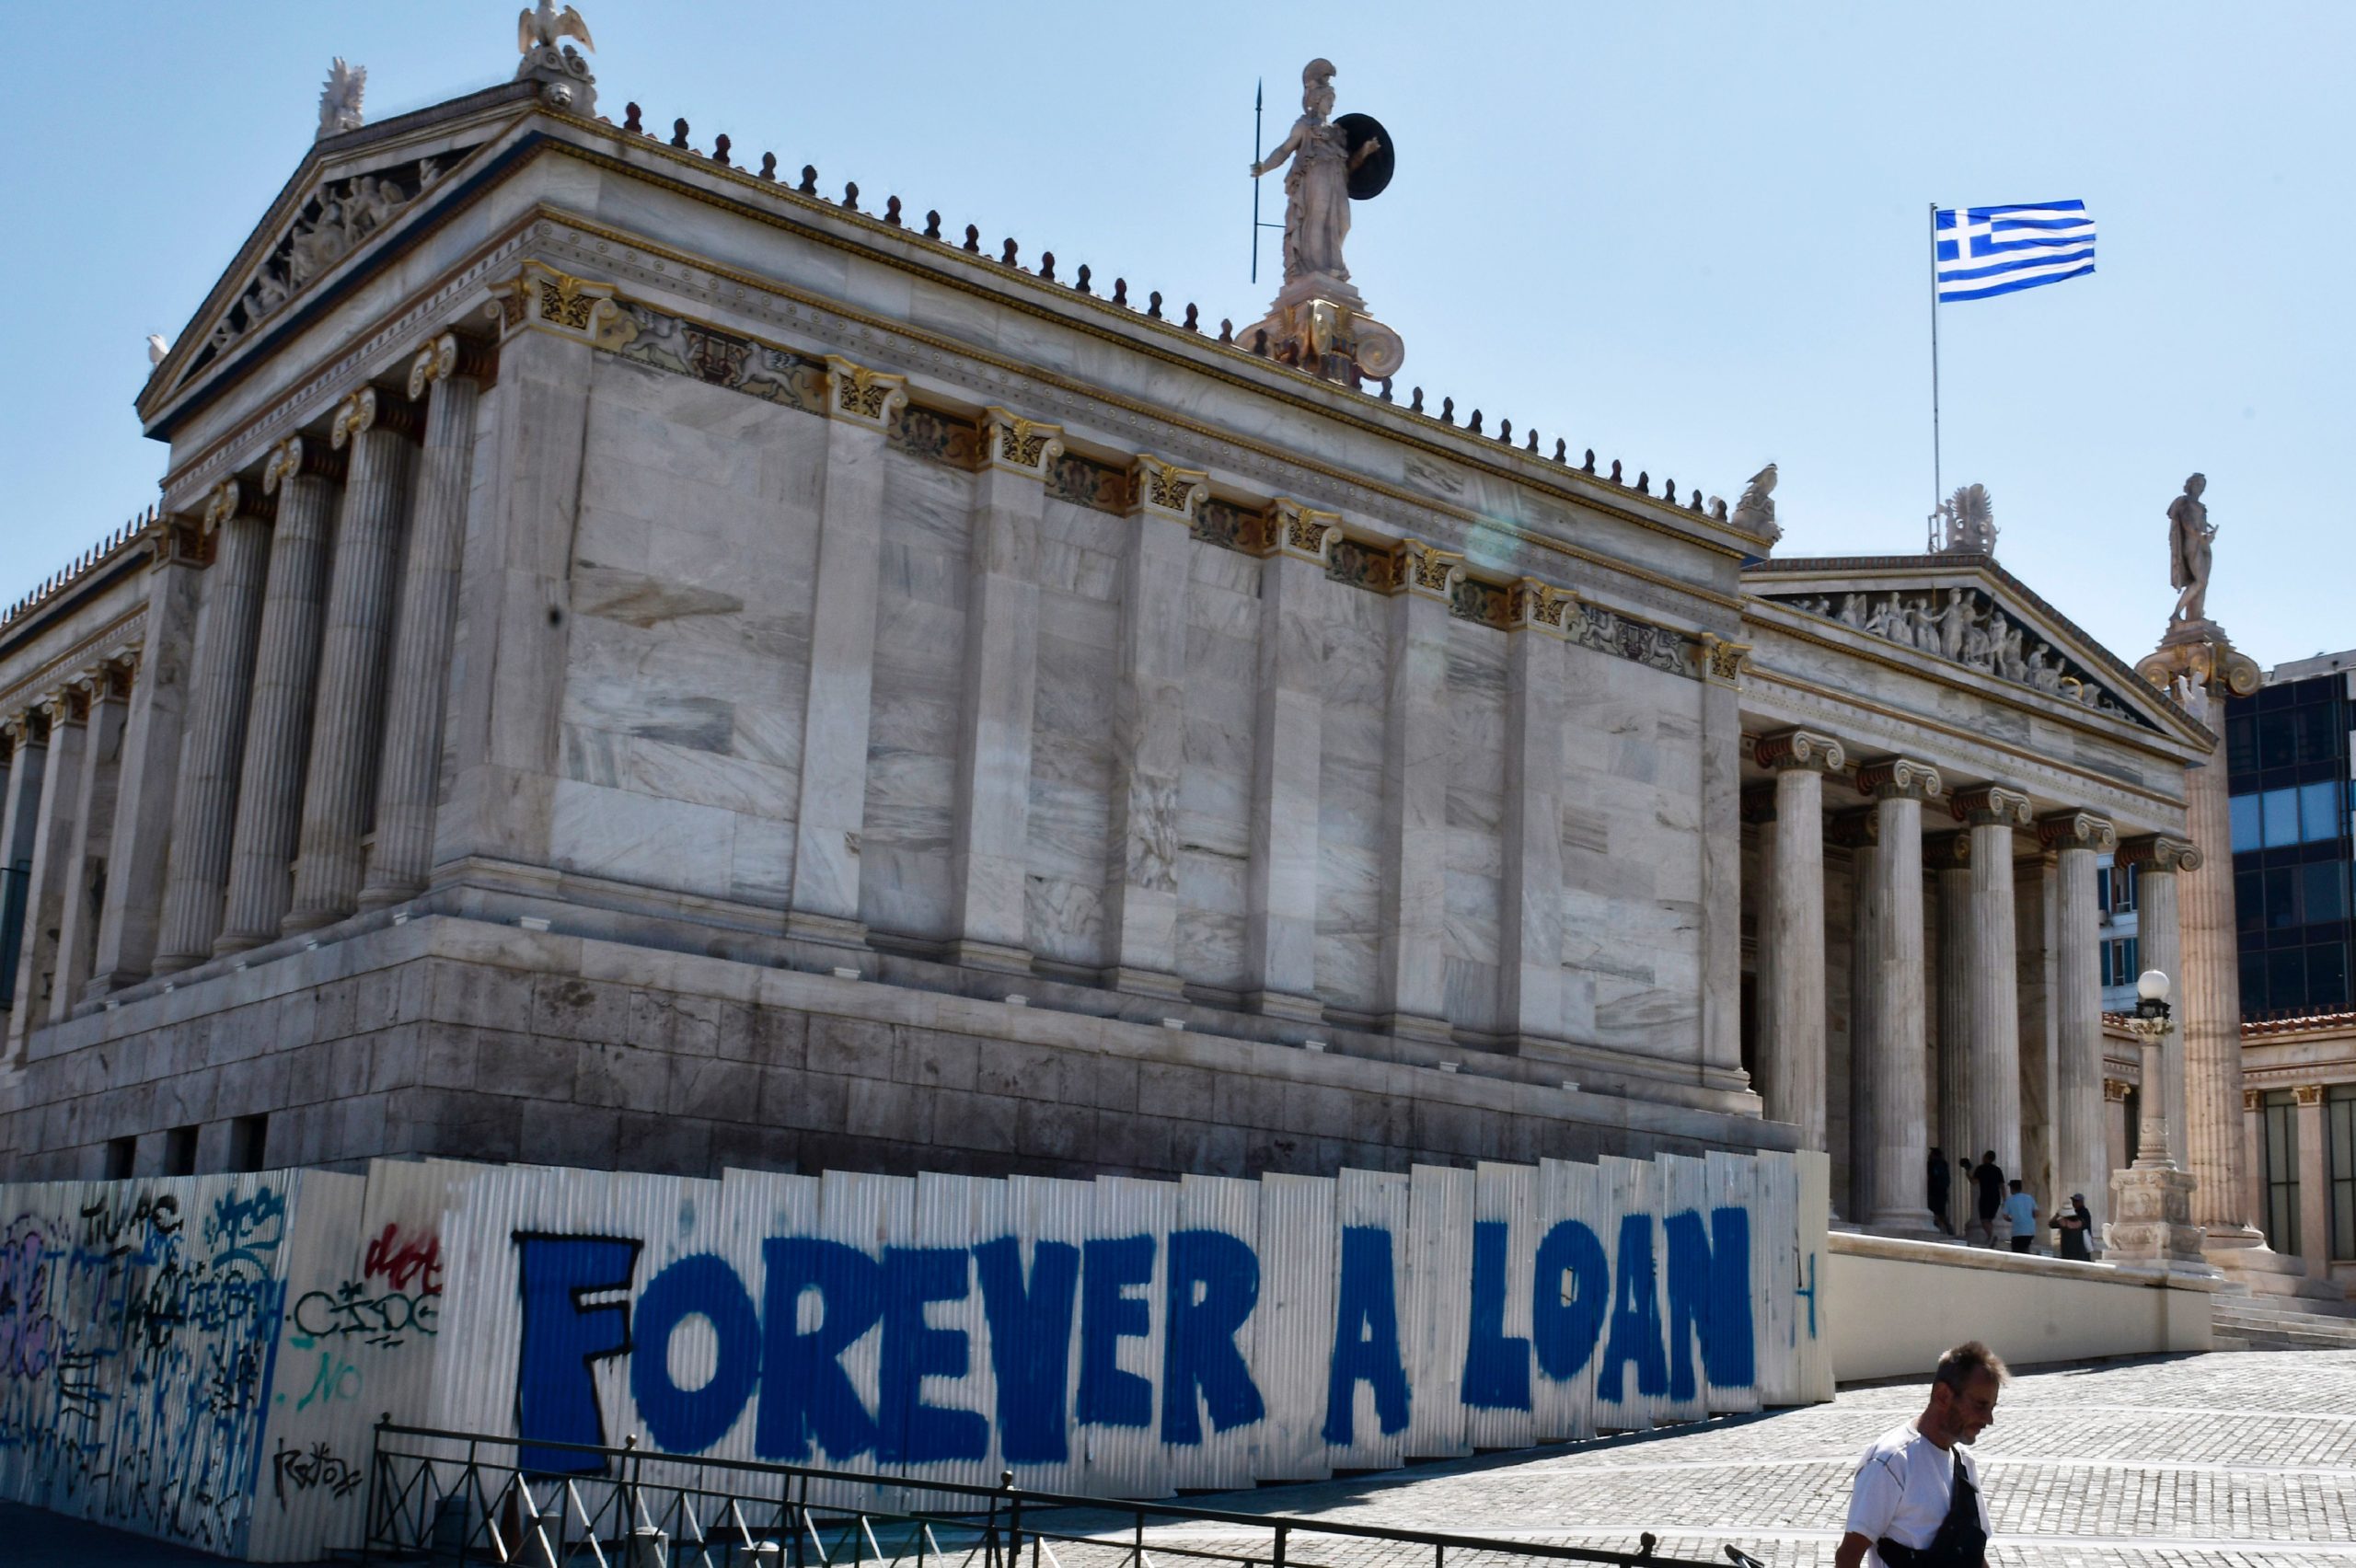 A woman walks past a graffiti refering to the Greek debt and reading "Forever a loan" outside the Academy of Athens building on August 28, 2017. / AFP PHOTO / LOUISA GOULIAMAKI (Photo credit should read LOUISA GOULIAMAKI/AFP via Getty Images)